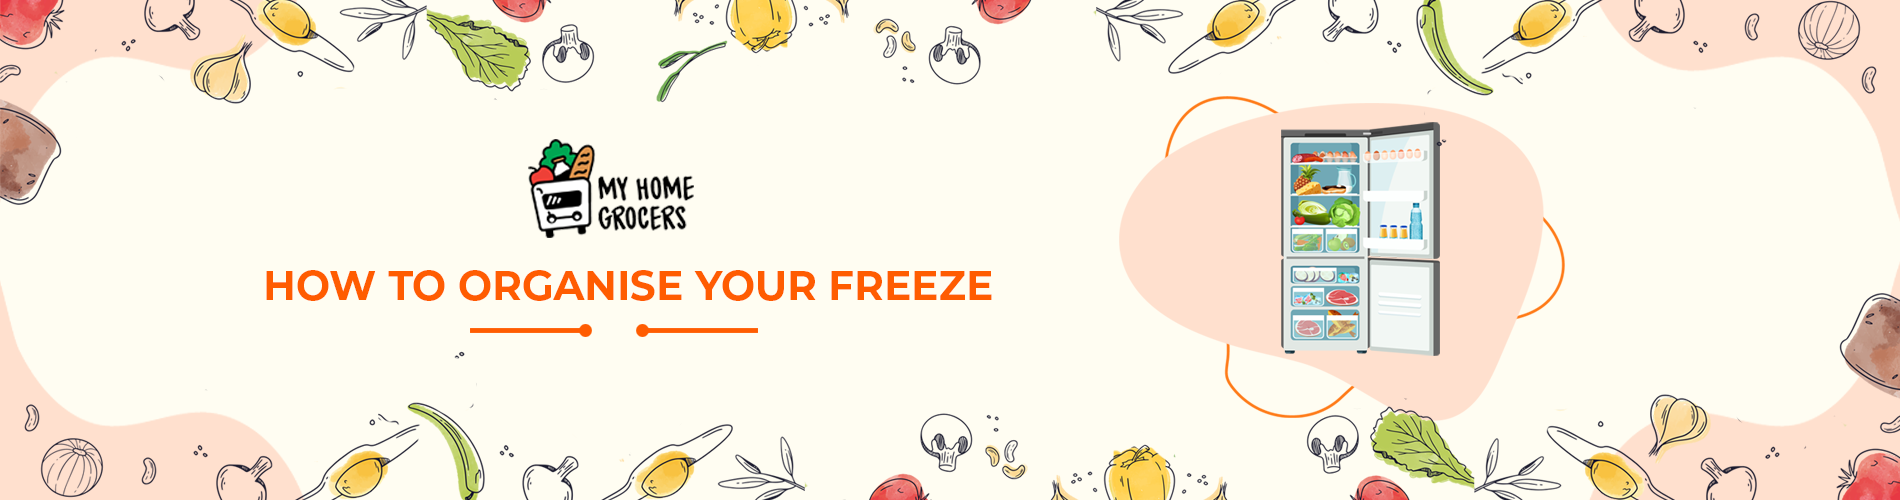 How to organise your freeze